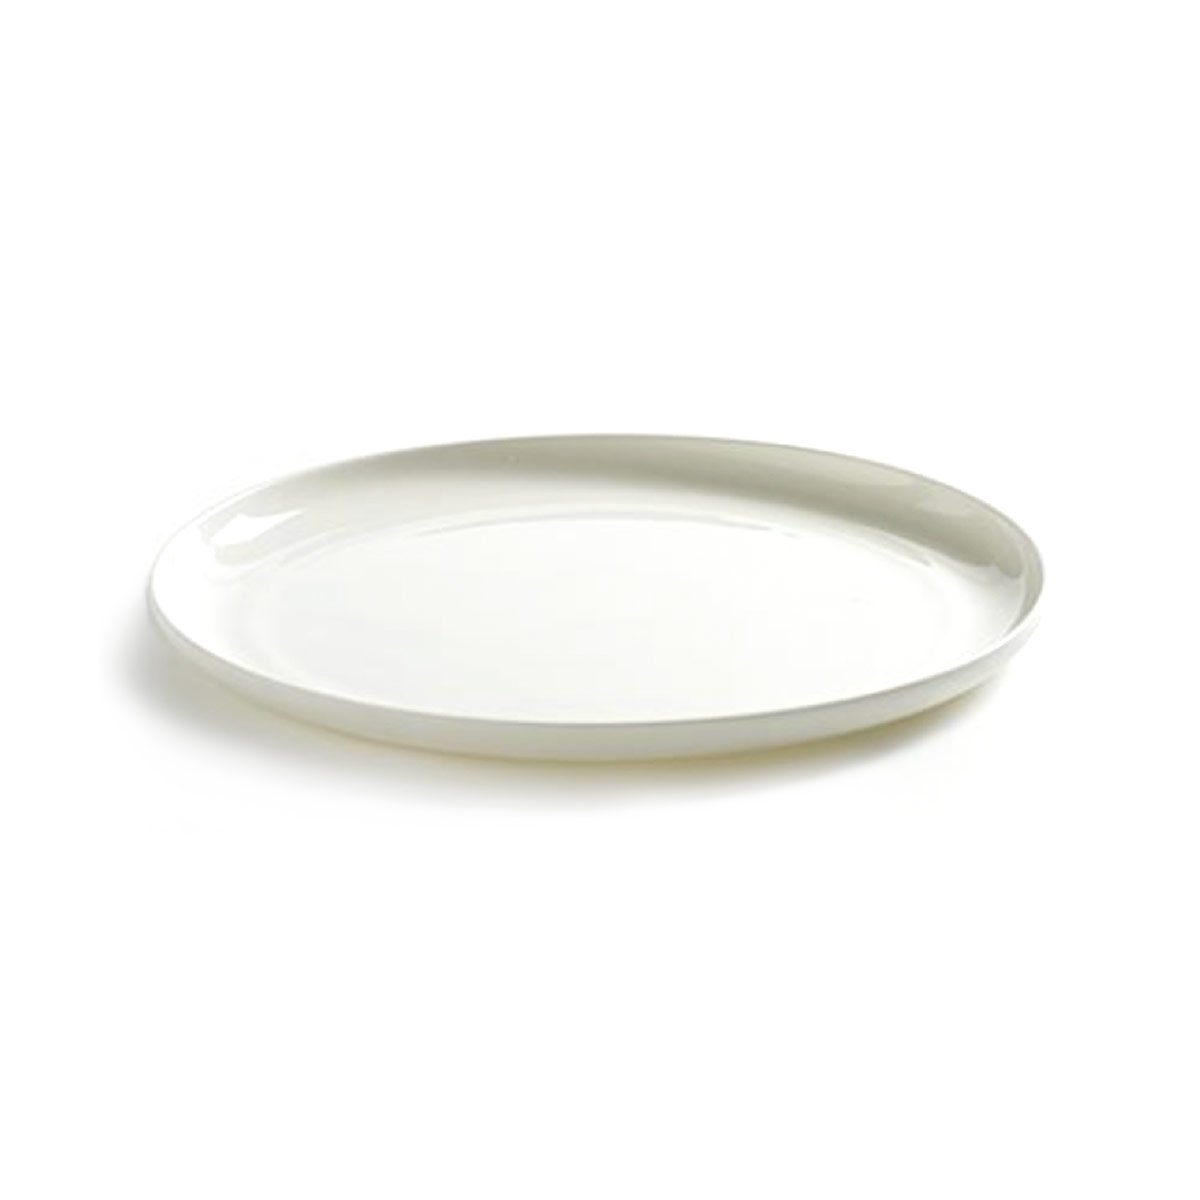 Piet Boon White Base Low Plate